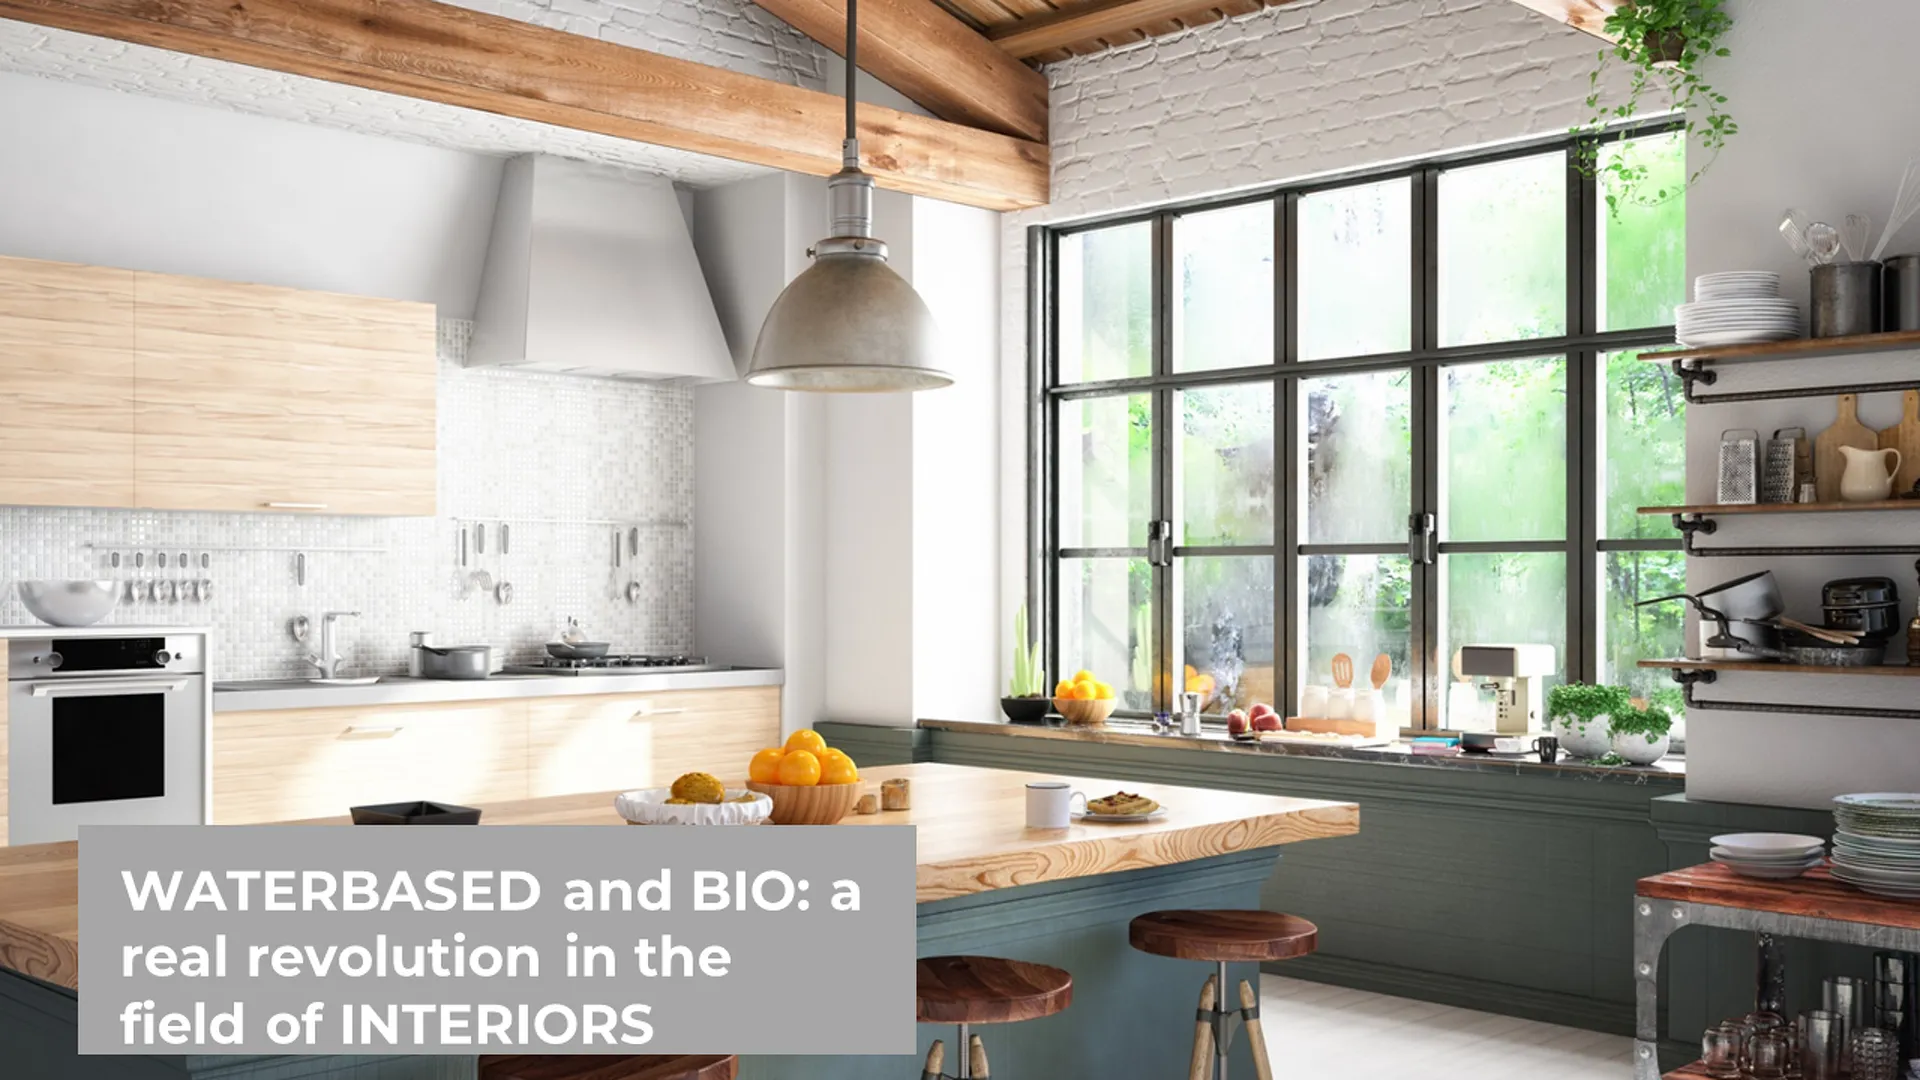 WATERBASED and BIO: a real revolution in the field of INTERIORS